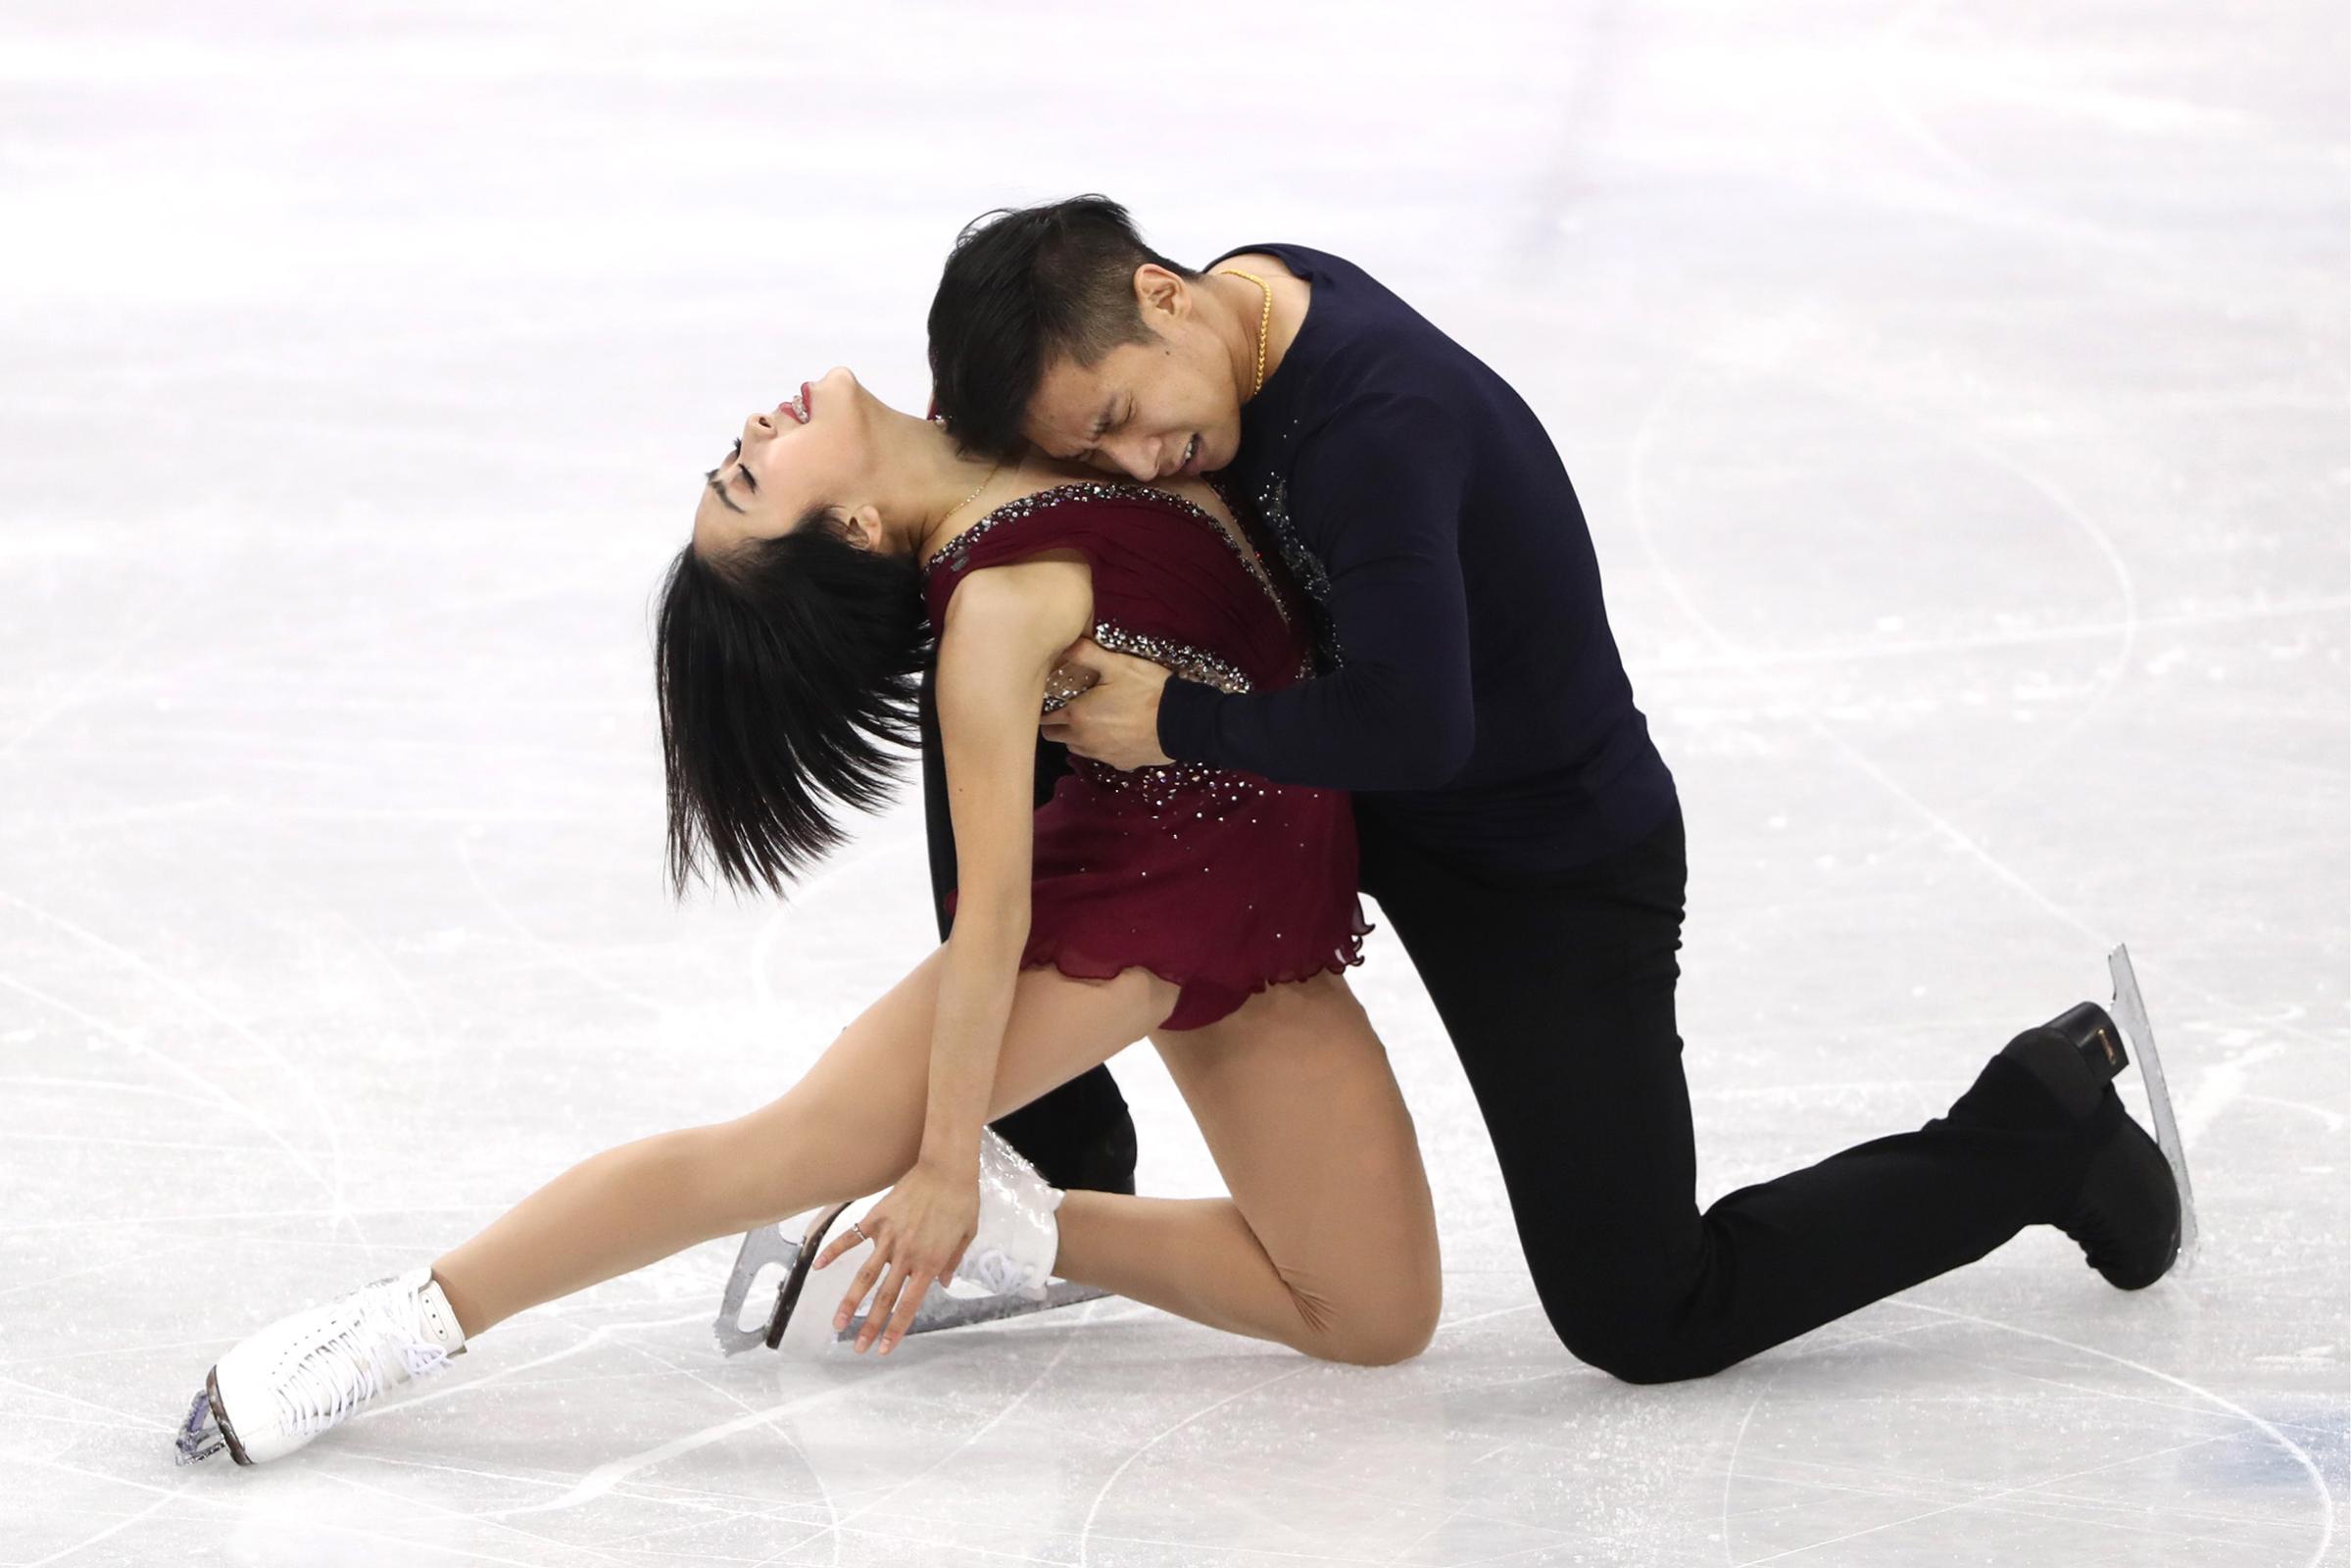 China's pair skaters Sui Wenjing and Han Cong perform their short program during a figure skating event at the 2018 Winter Olympic Games at Gangneung Ice Arena.